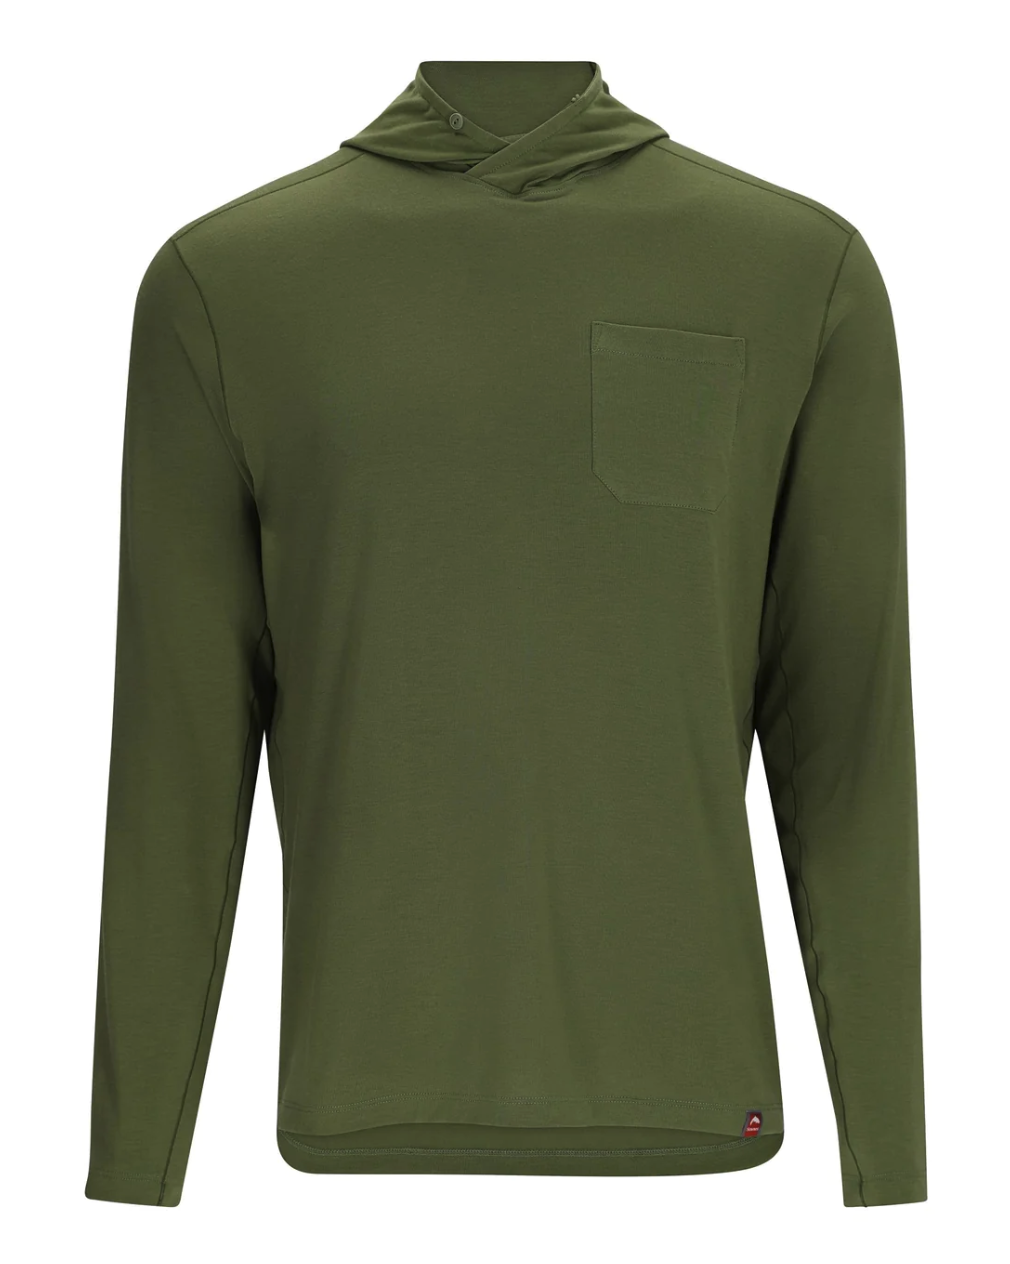 Buy Simms Glades Hoody online at The Fly Fishers.